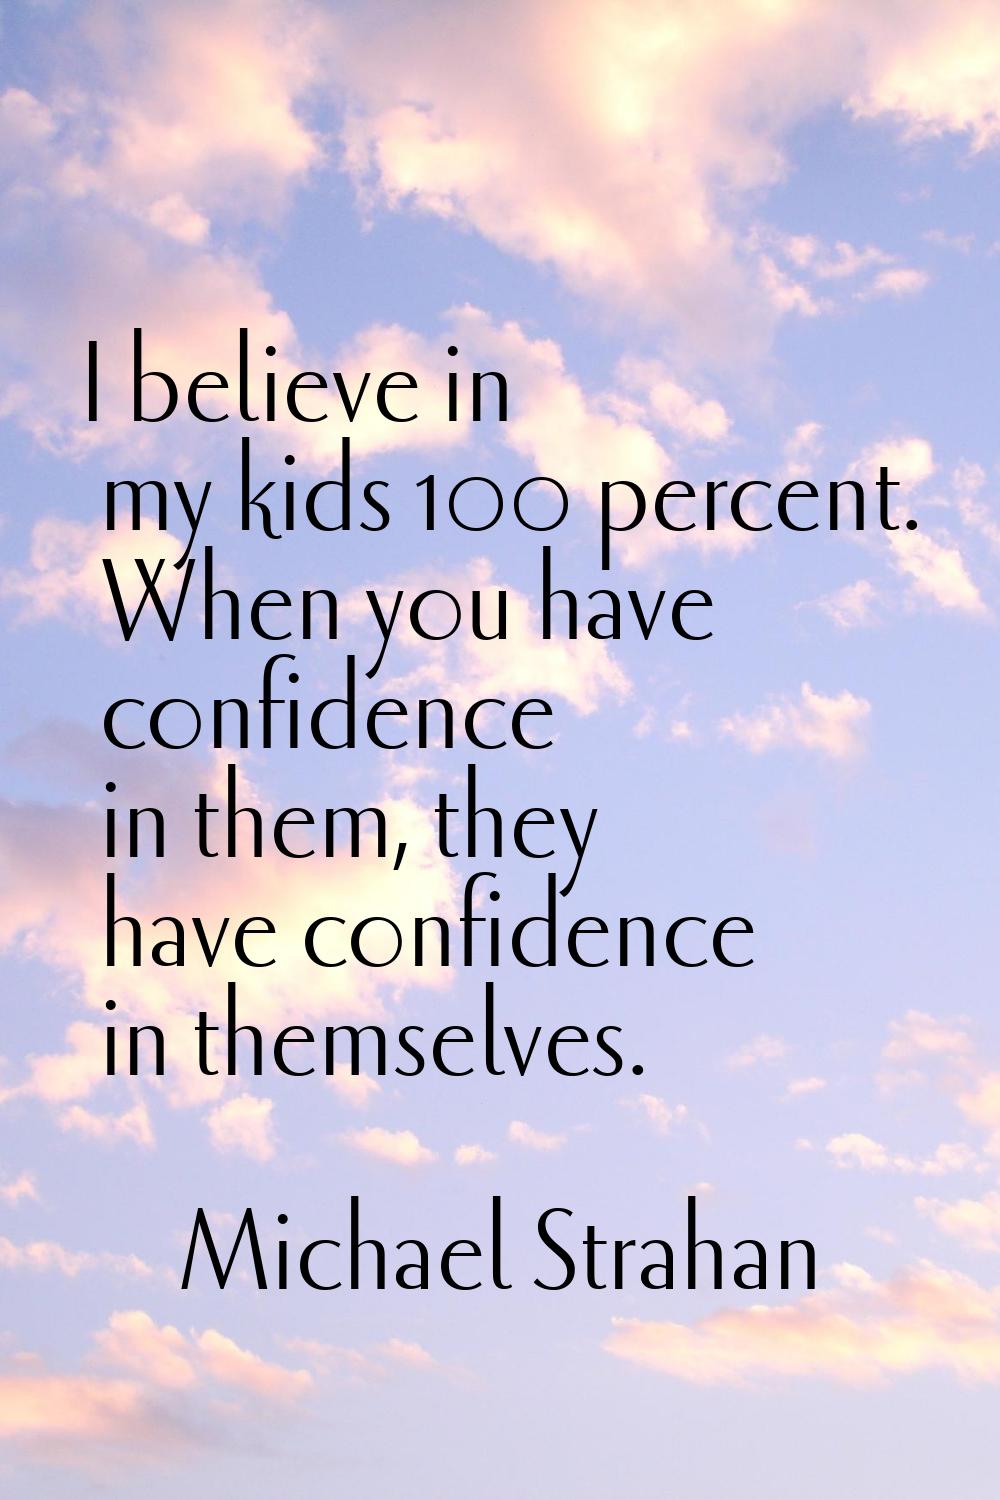 I believe in my kids 100 percent. When you have confidence in them, they have confidence in themsel